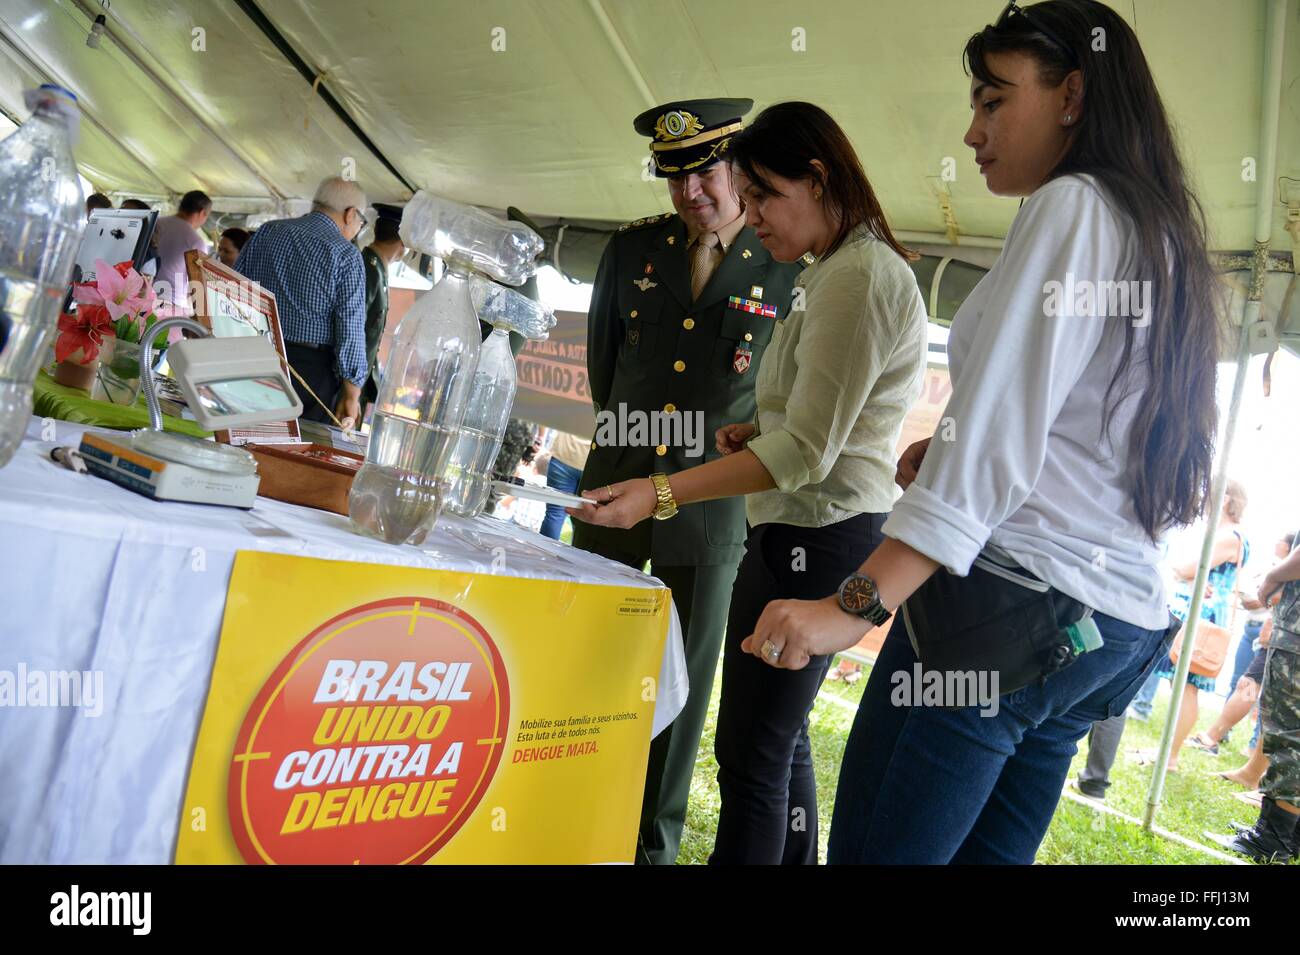 An outreach program held by the military to warn the public on combating the spread the Aedes aegypti mosquito  which carries both the Zika virus and Dengue Fever during National Flag day at the Plaza of the Three Powers February 14, 2016 in Brasilia, Brazil. Stock Photo